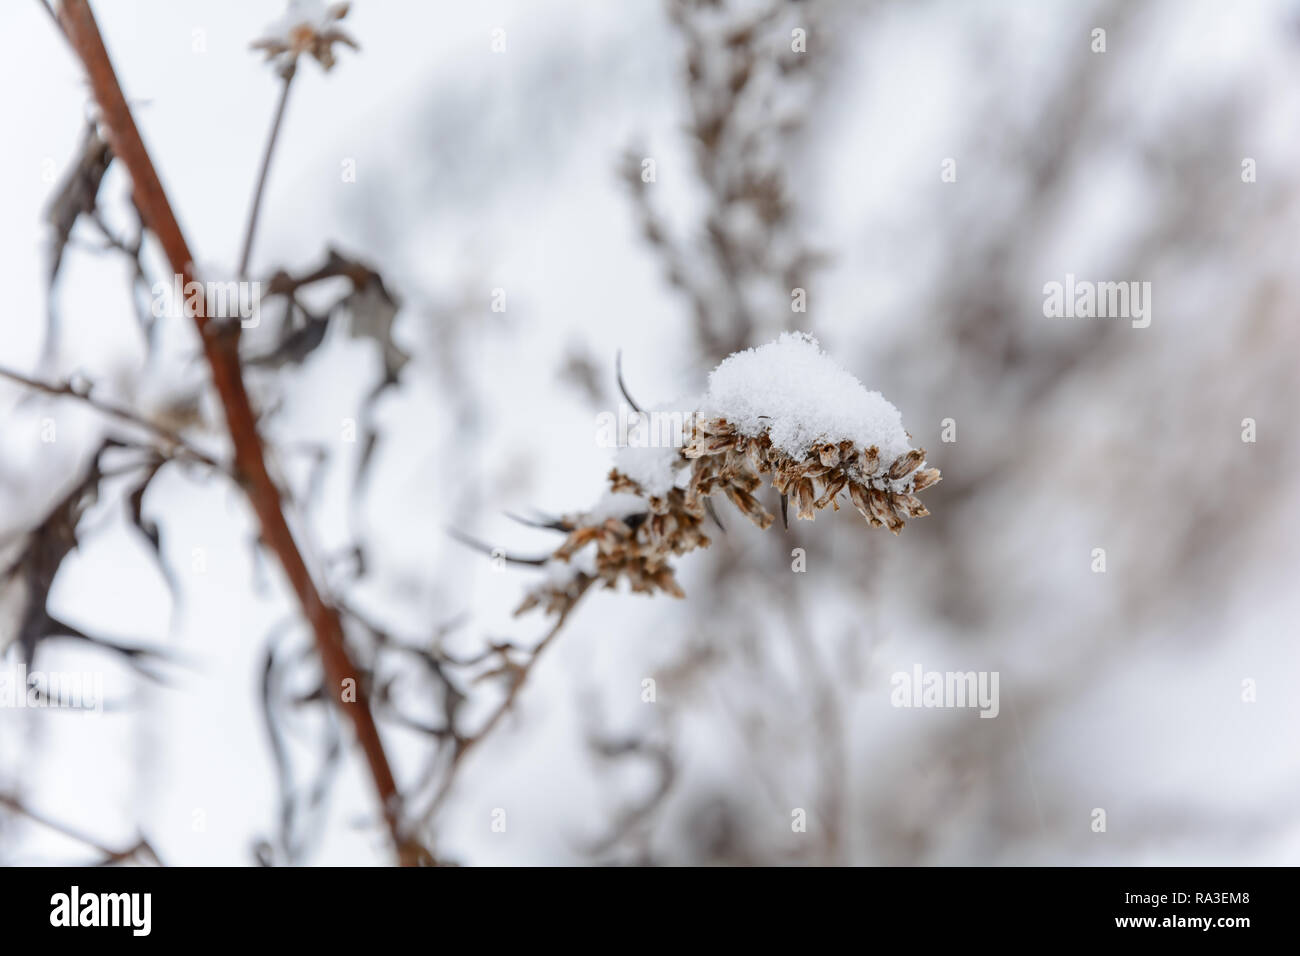 Dried plant in snow in winter Stock Photo